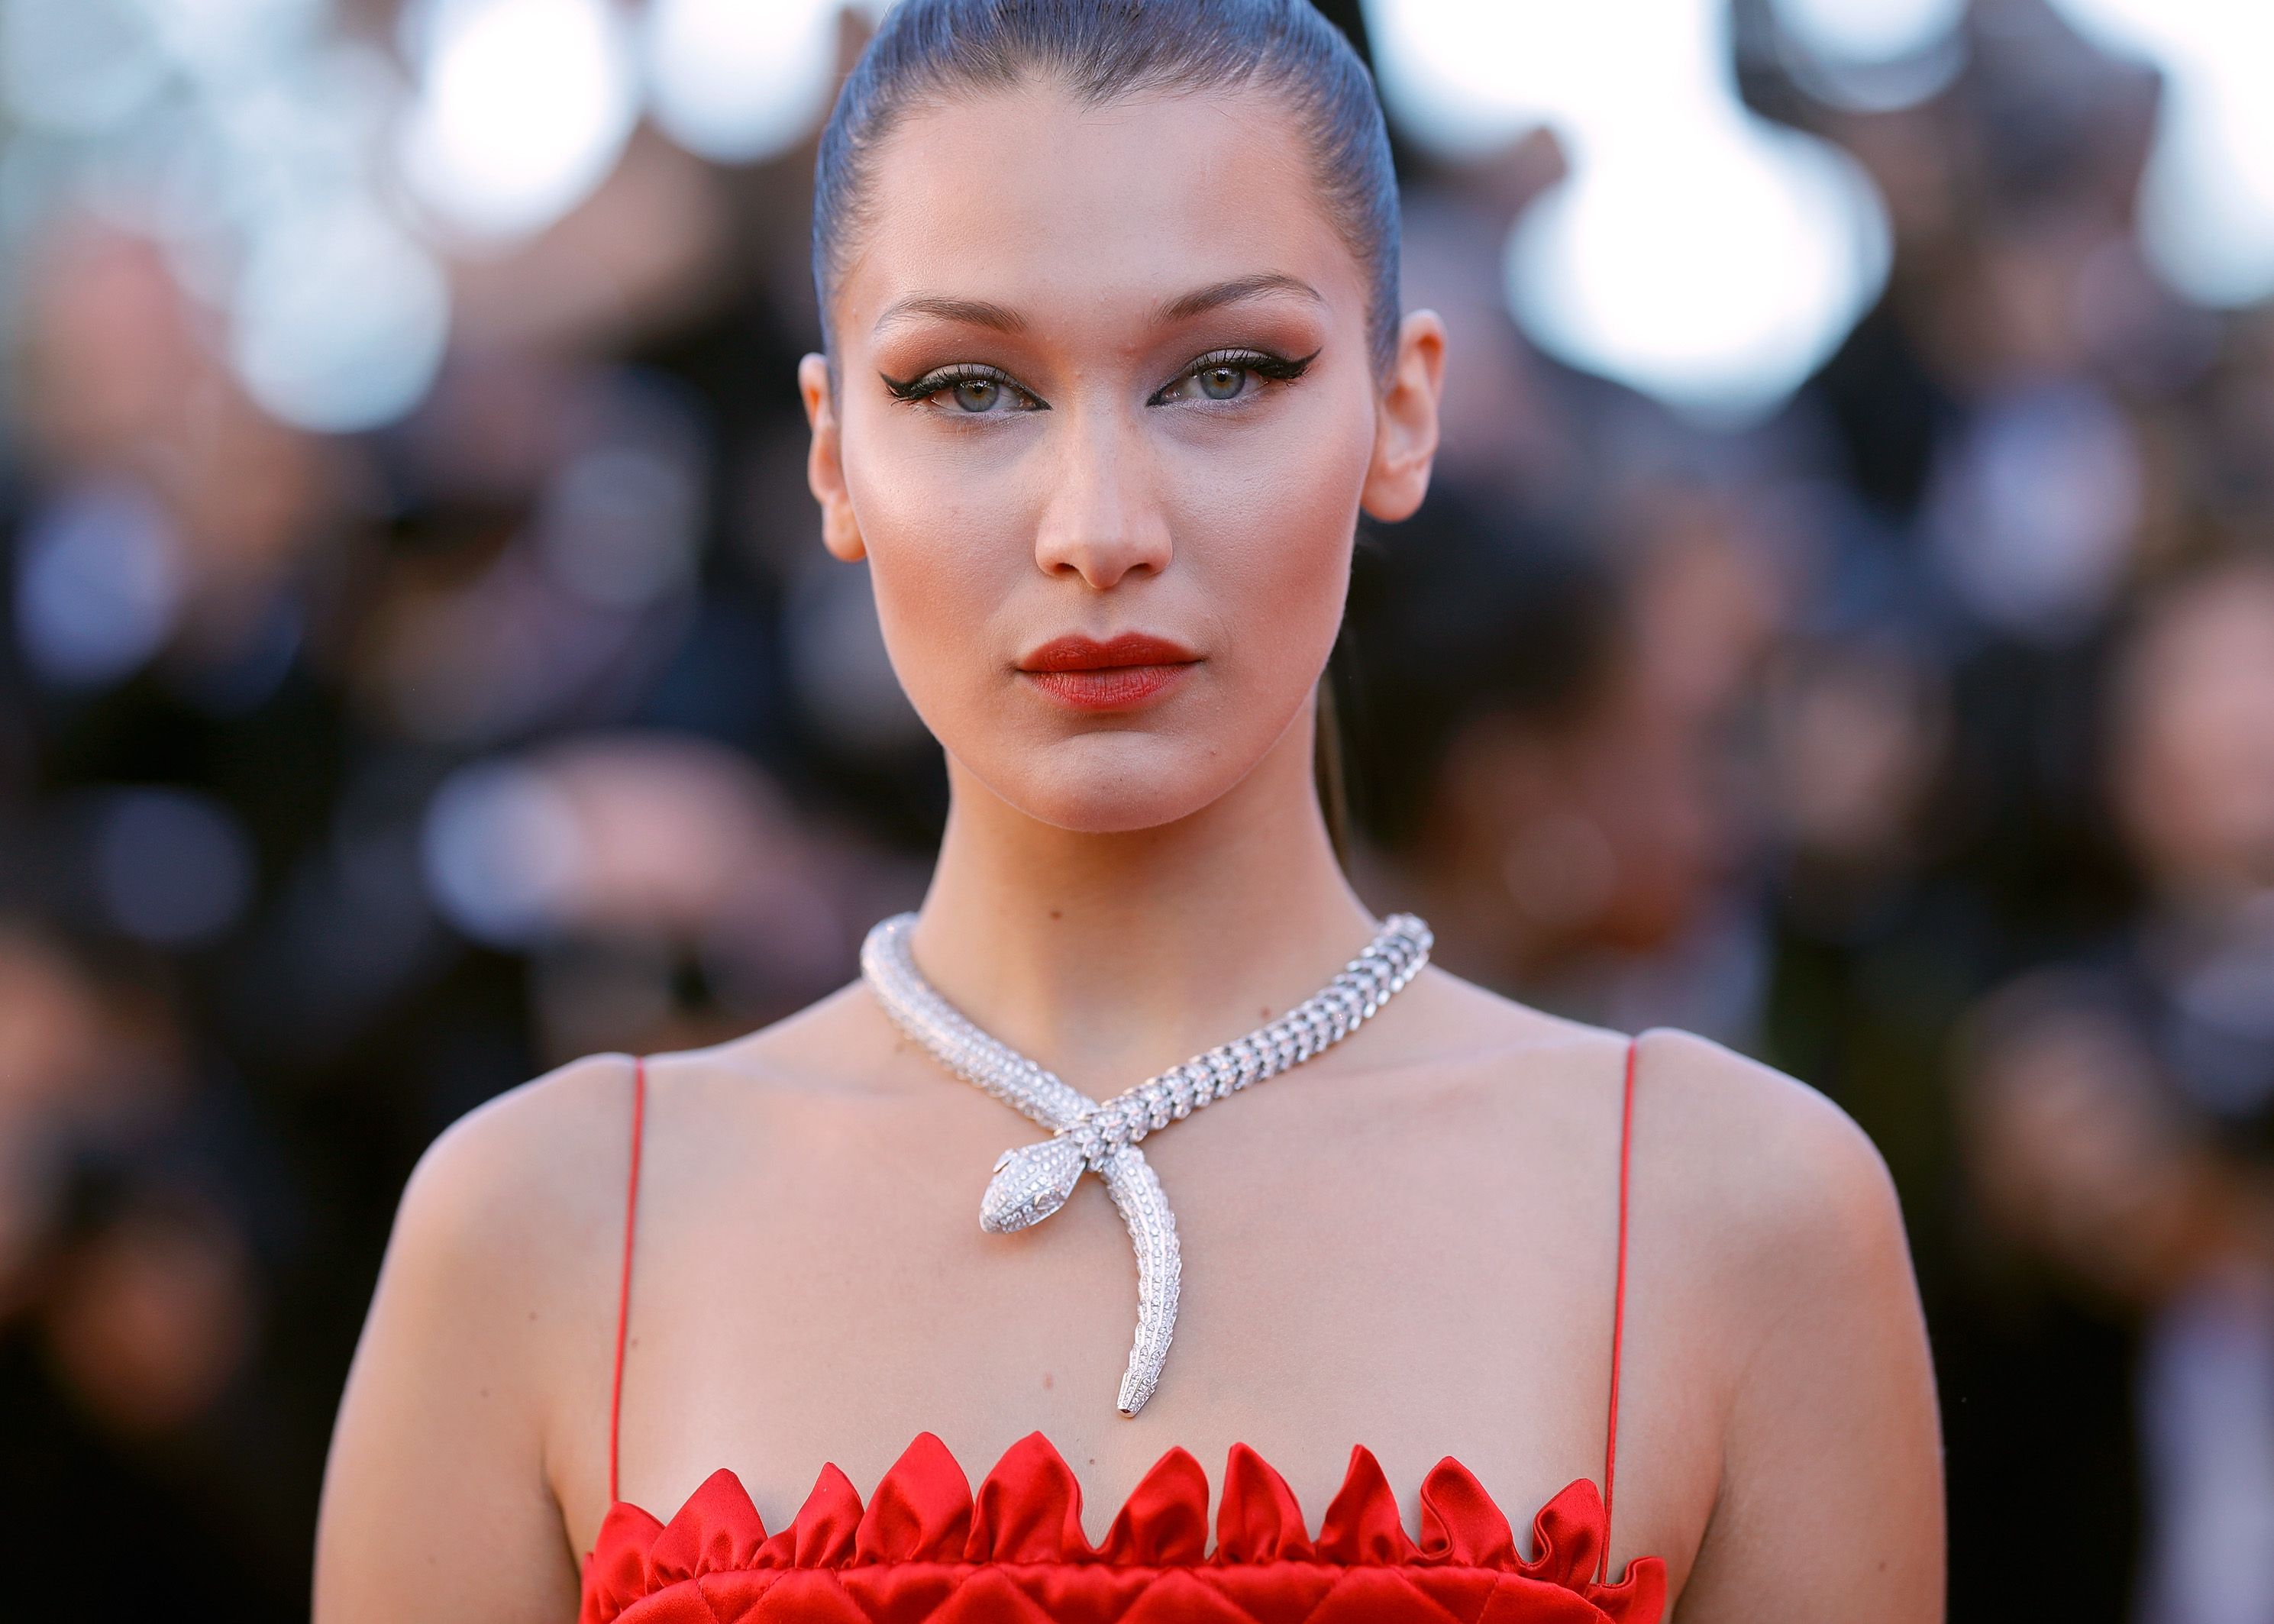 Bella Hadid wears dominatrix leather dress in Paris | Daily Mail Online